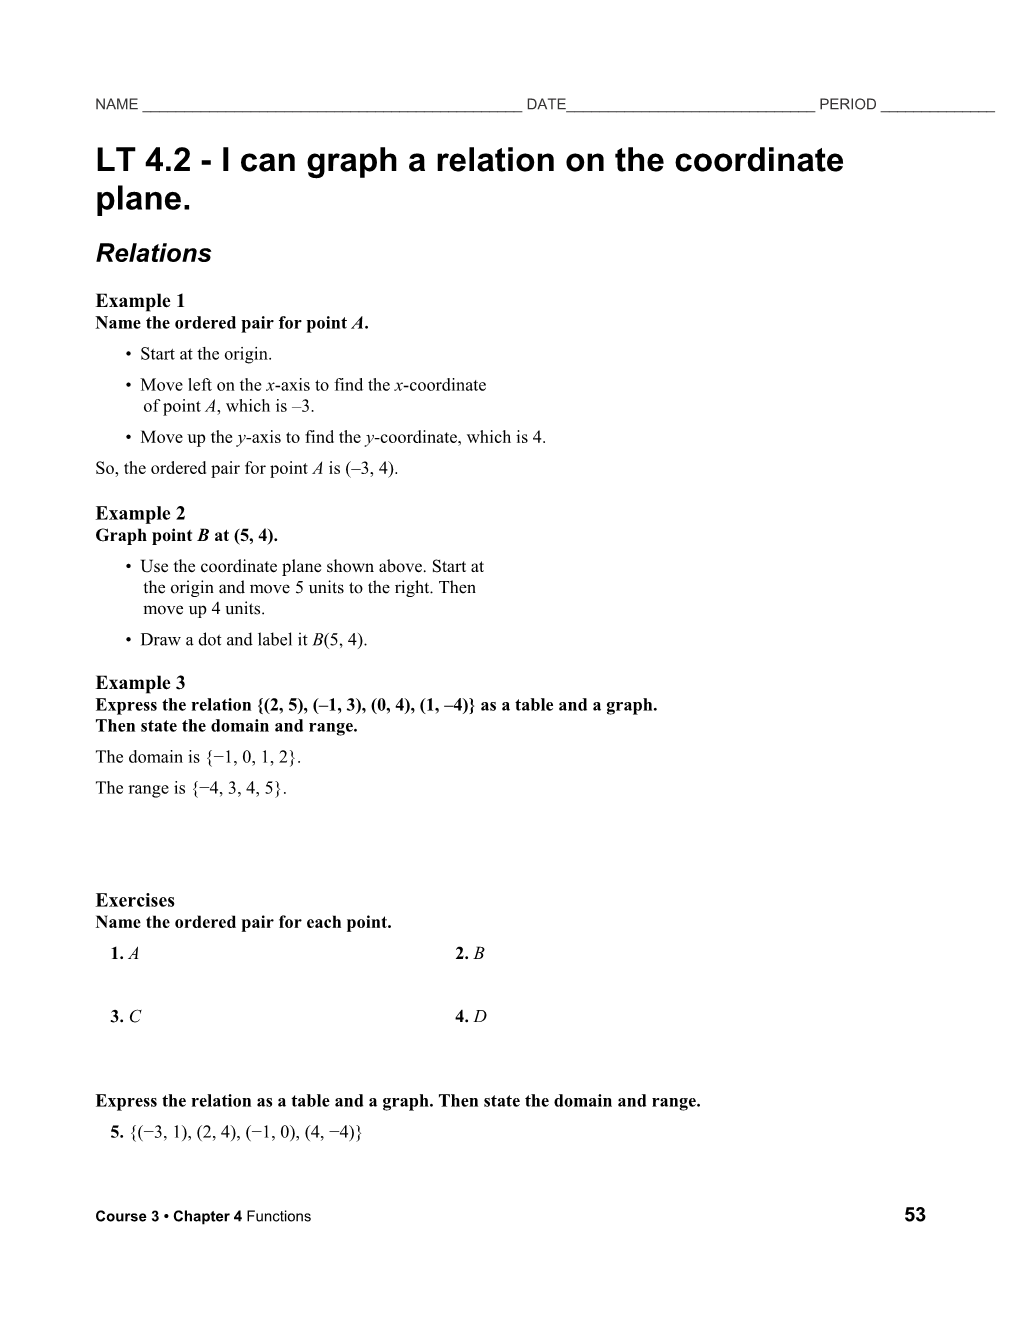 LT 4.1 - I Can Translate Tables and Graphs Into Linear Equations